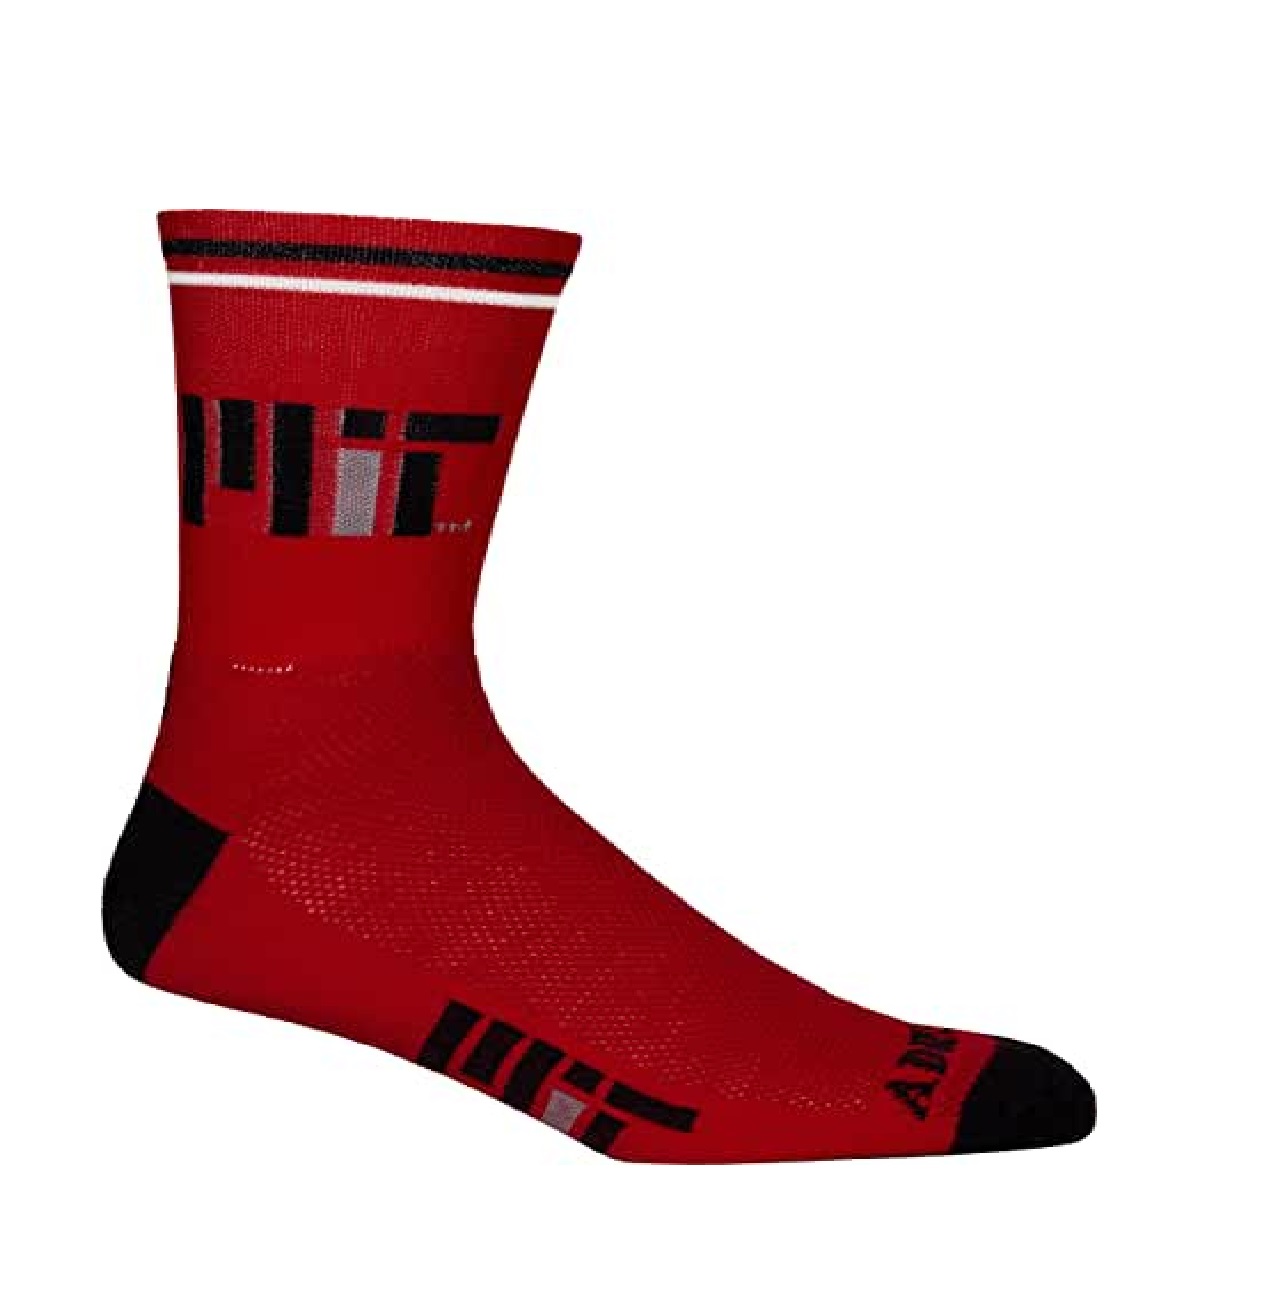 Massachusetts Institute of Technology (MIT) 5" Crew Cycling Socks Red